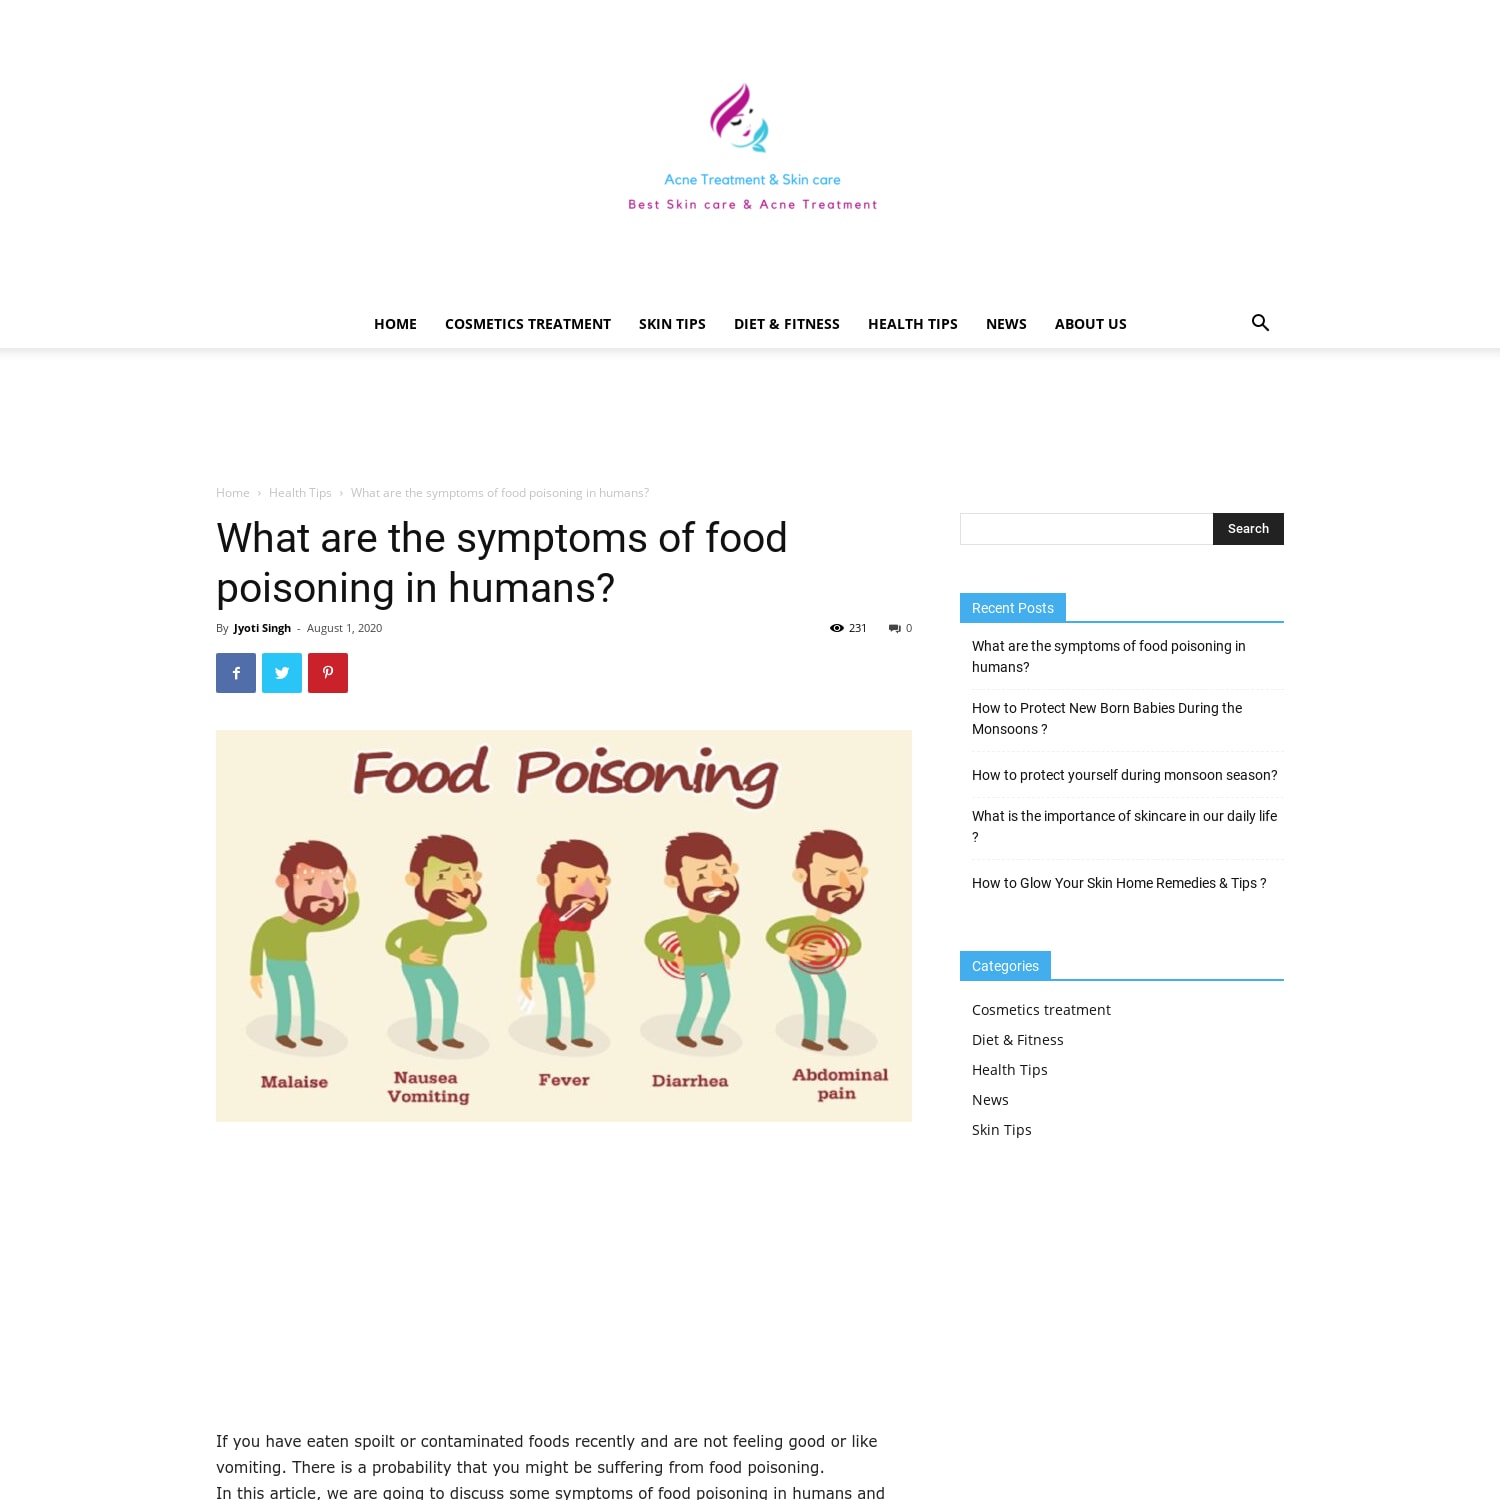 What are the symptoms of food poisoning in humans?